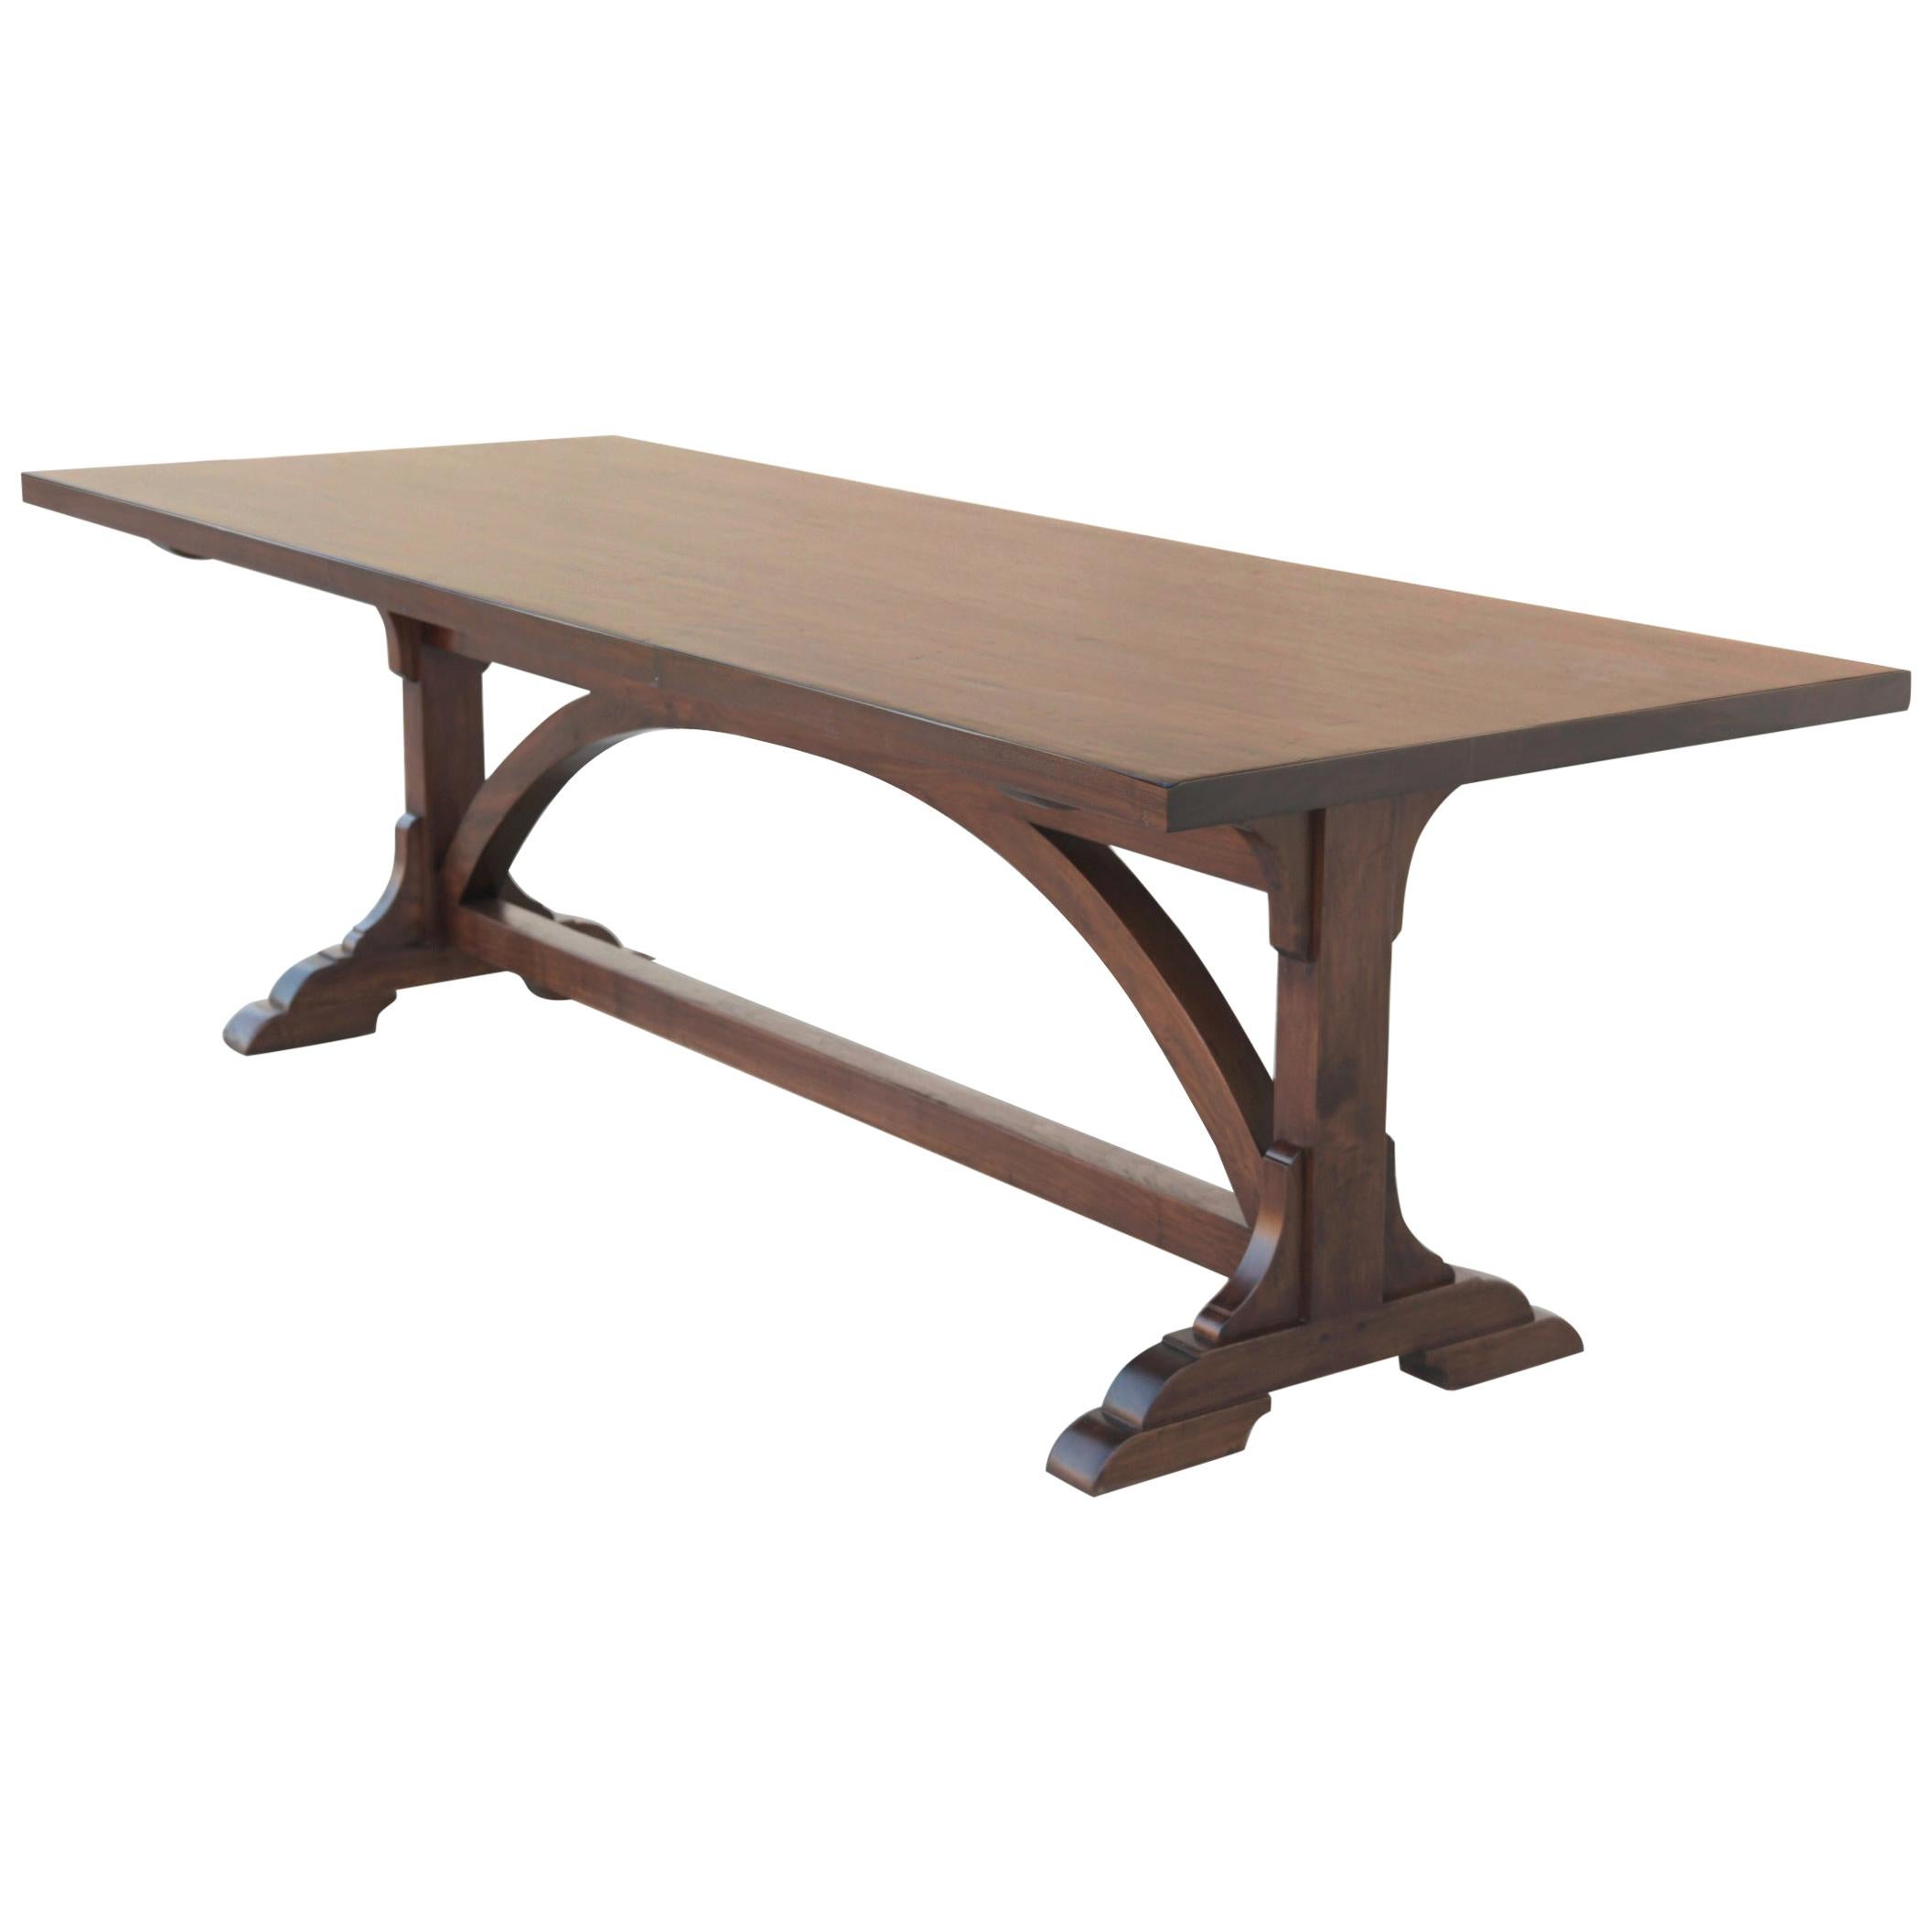 Emilie Dining Table made from Black Walnut, made to Order by Petersen Antiques